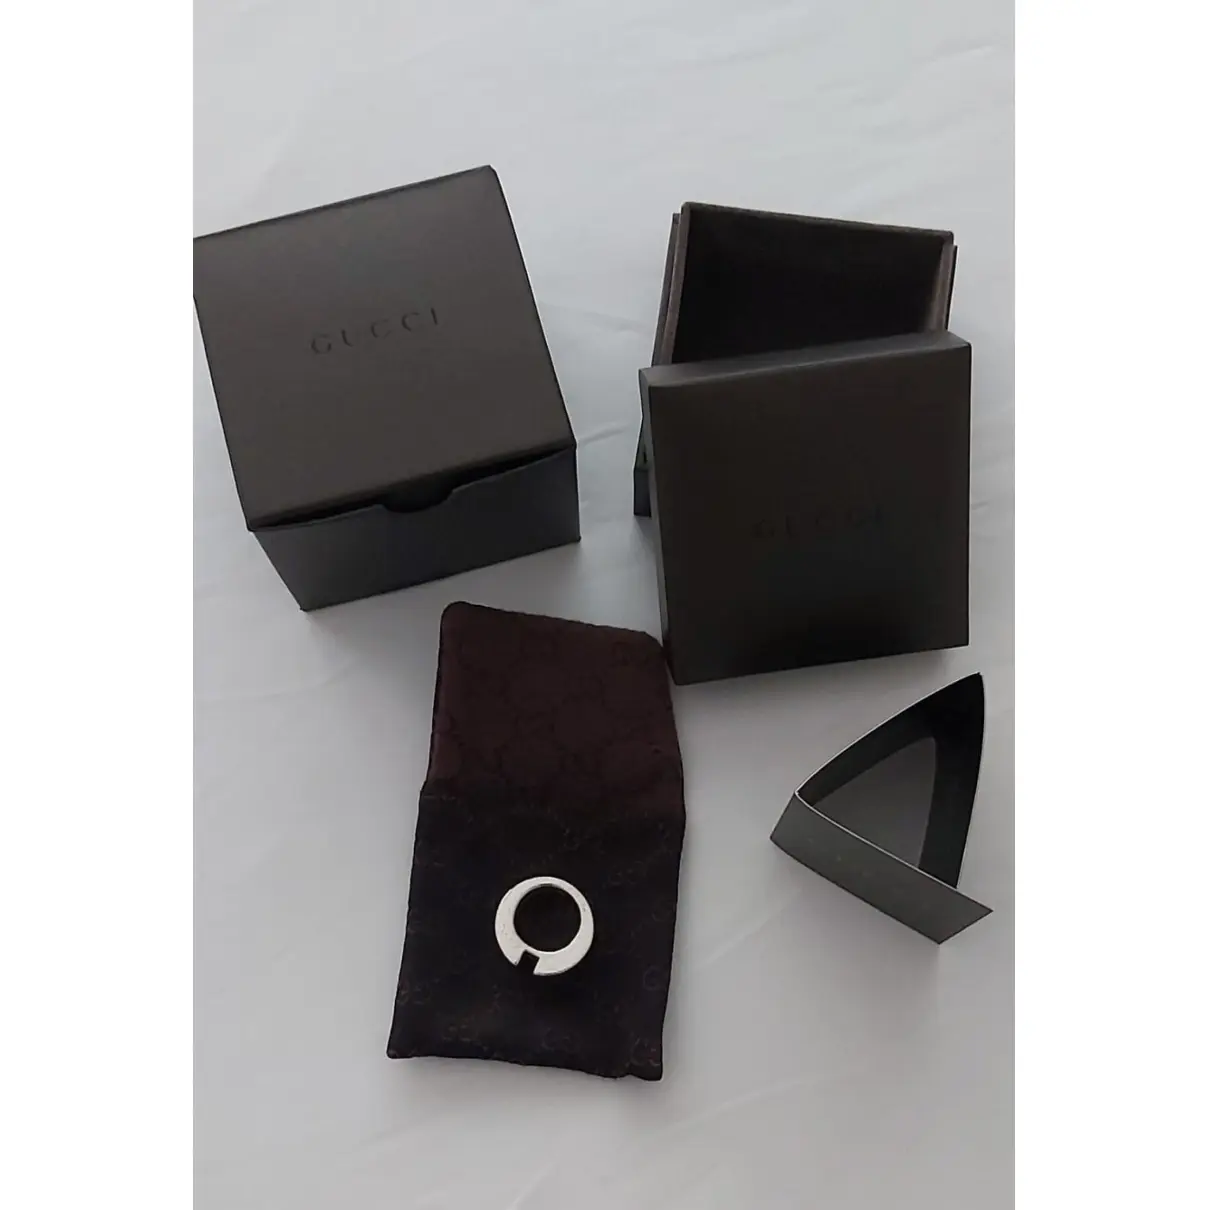 Buy Gucci Silver ring online - Vintage